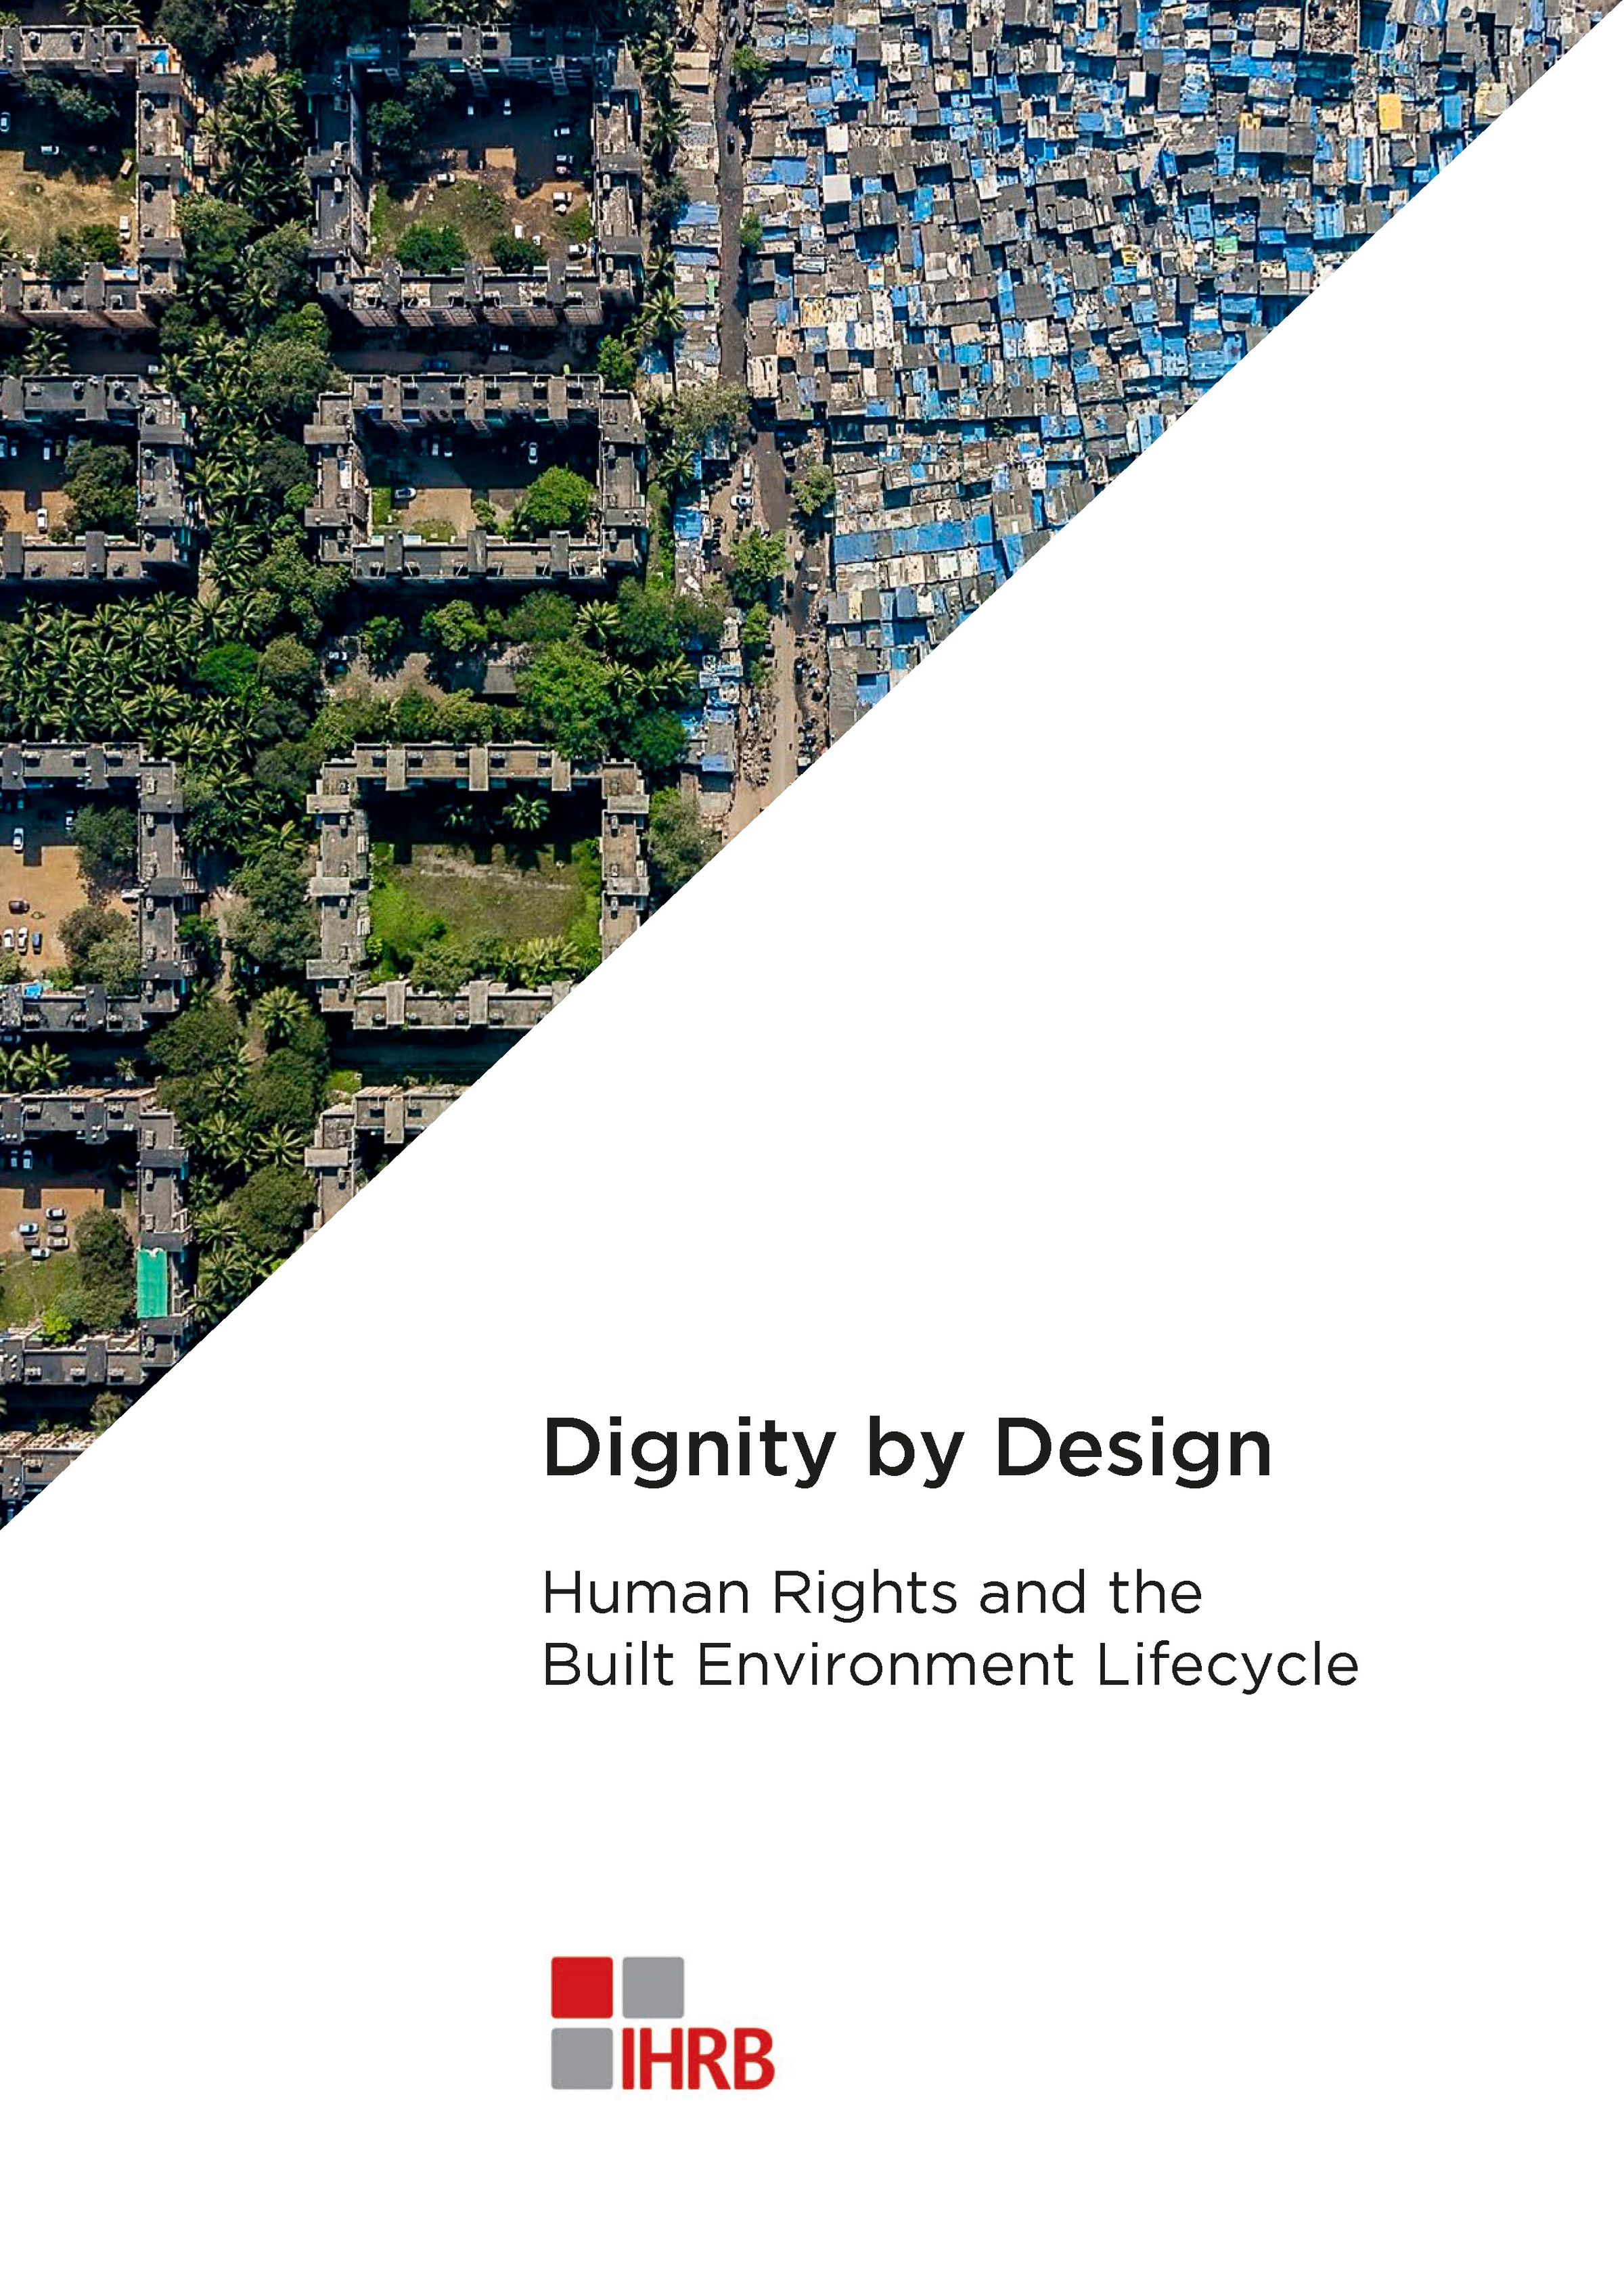 Front cover of the dignity by design framework